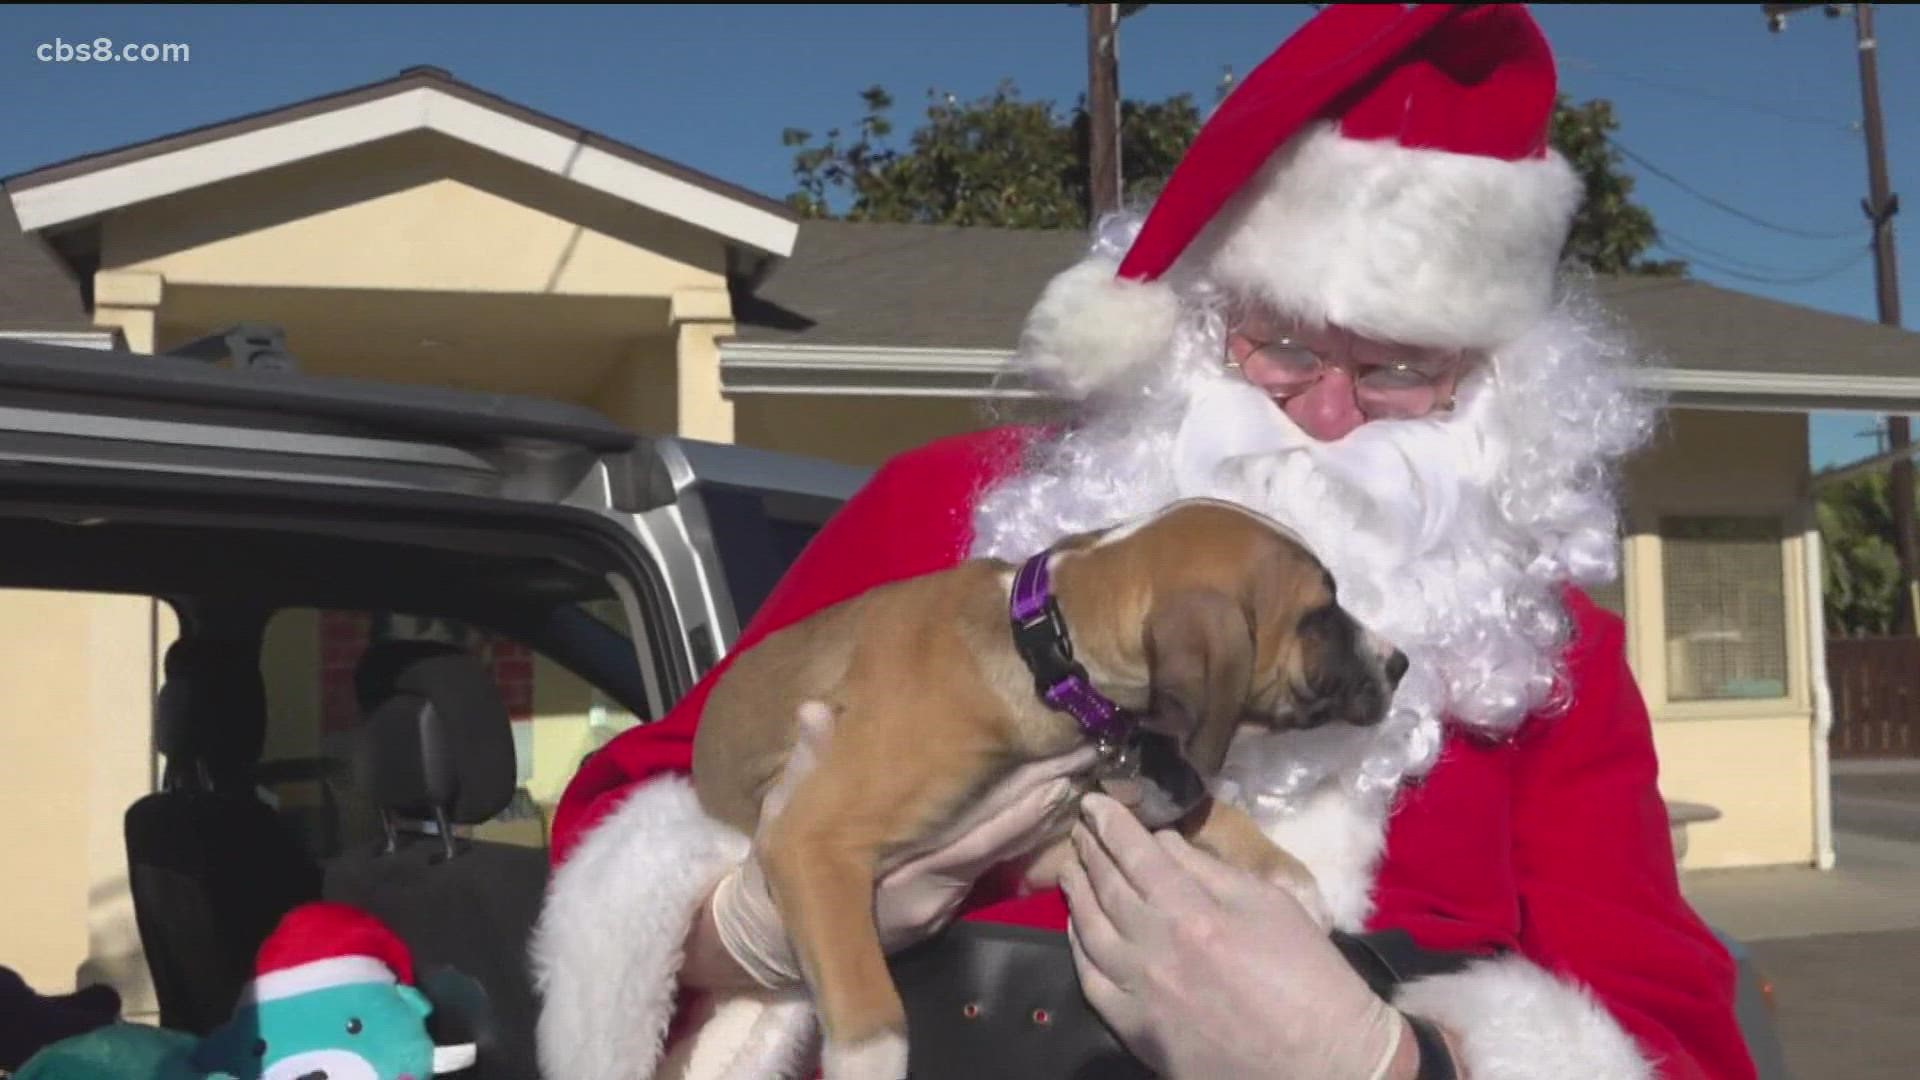 Last Christmas, Rancho Coastal Humane Society’s Santa Paws and his helpers delivered a puppy named Dylan to the Selistch family in San Marcos.